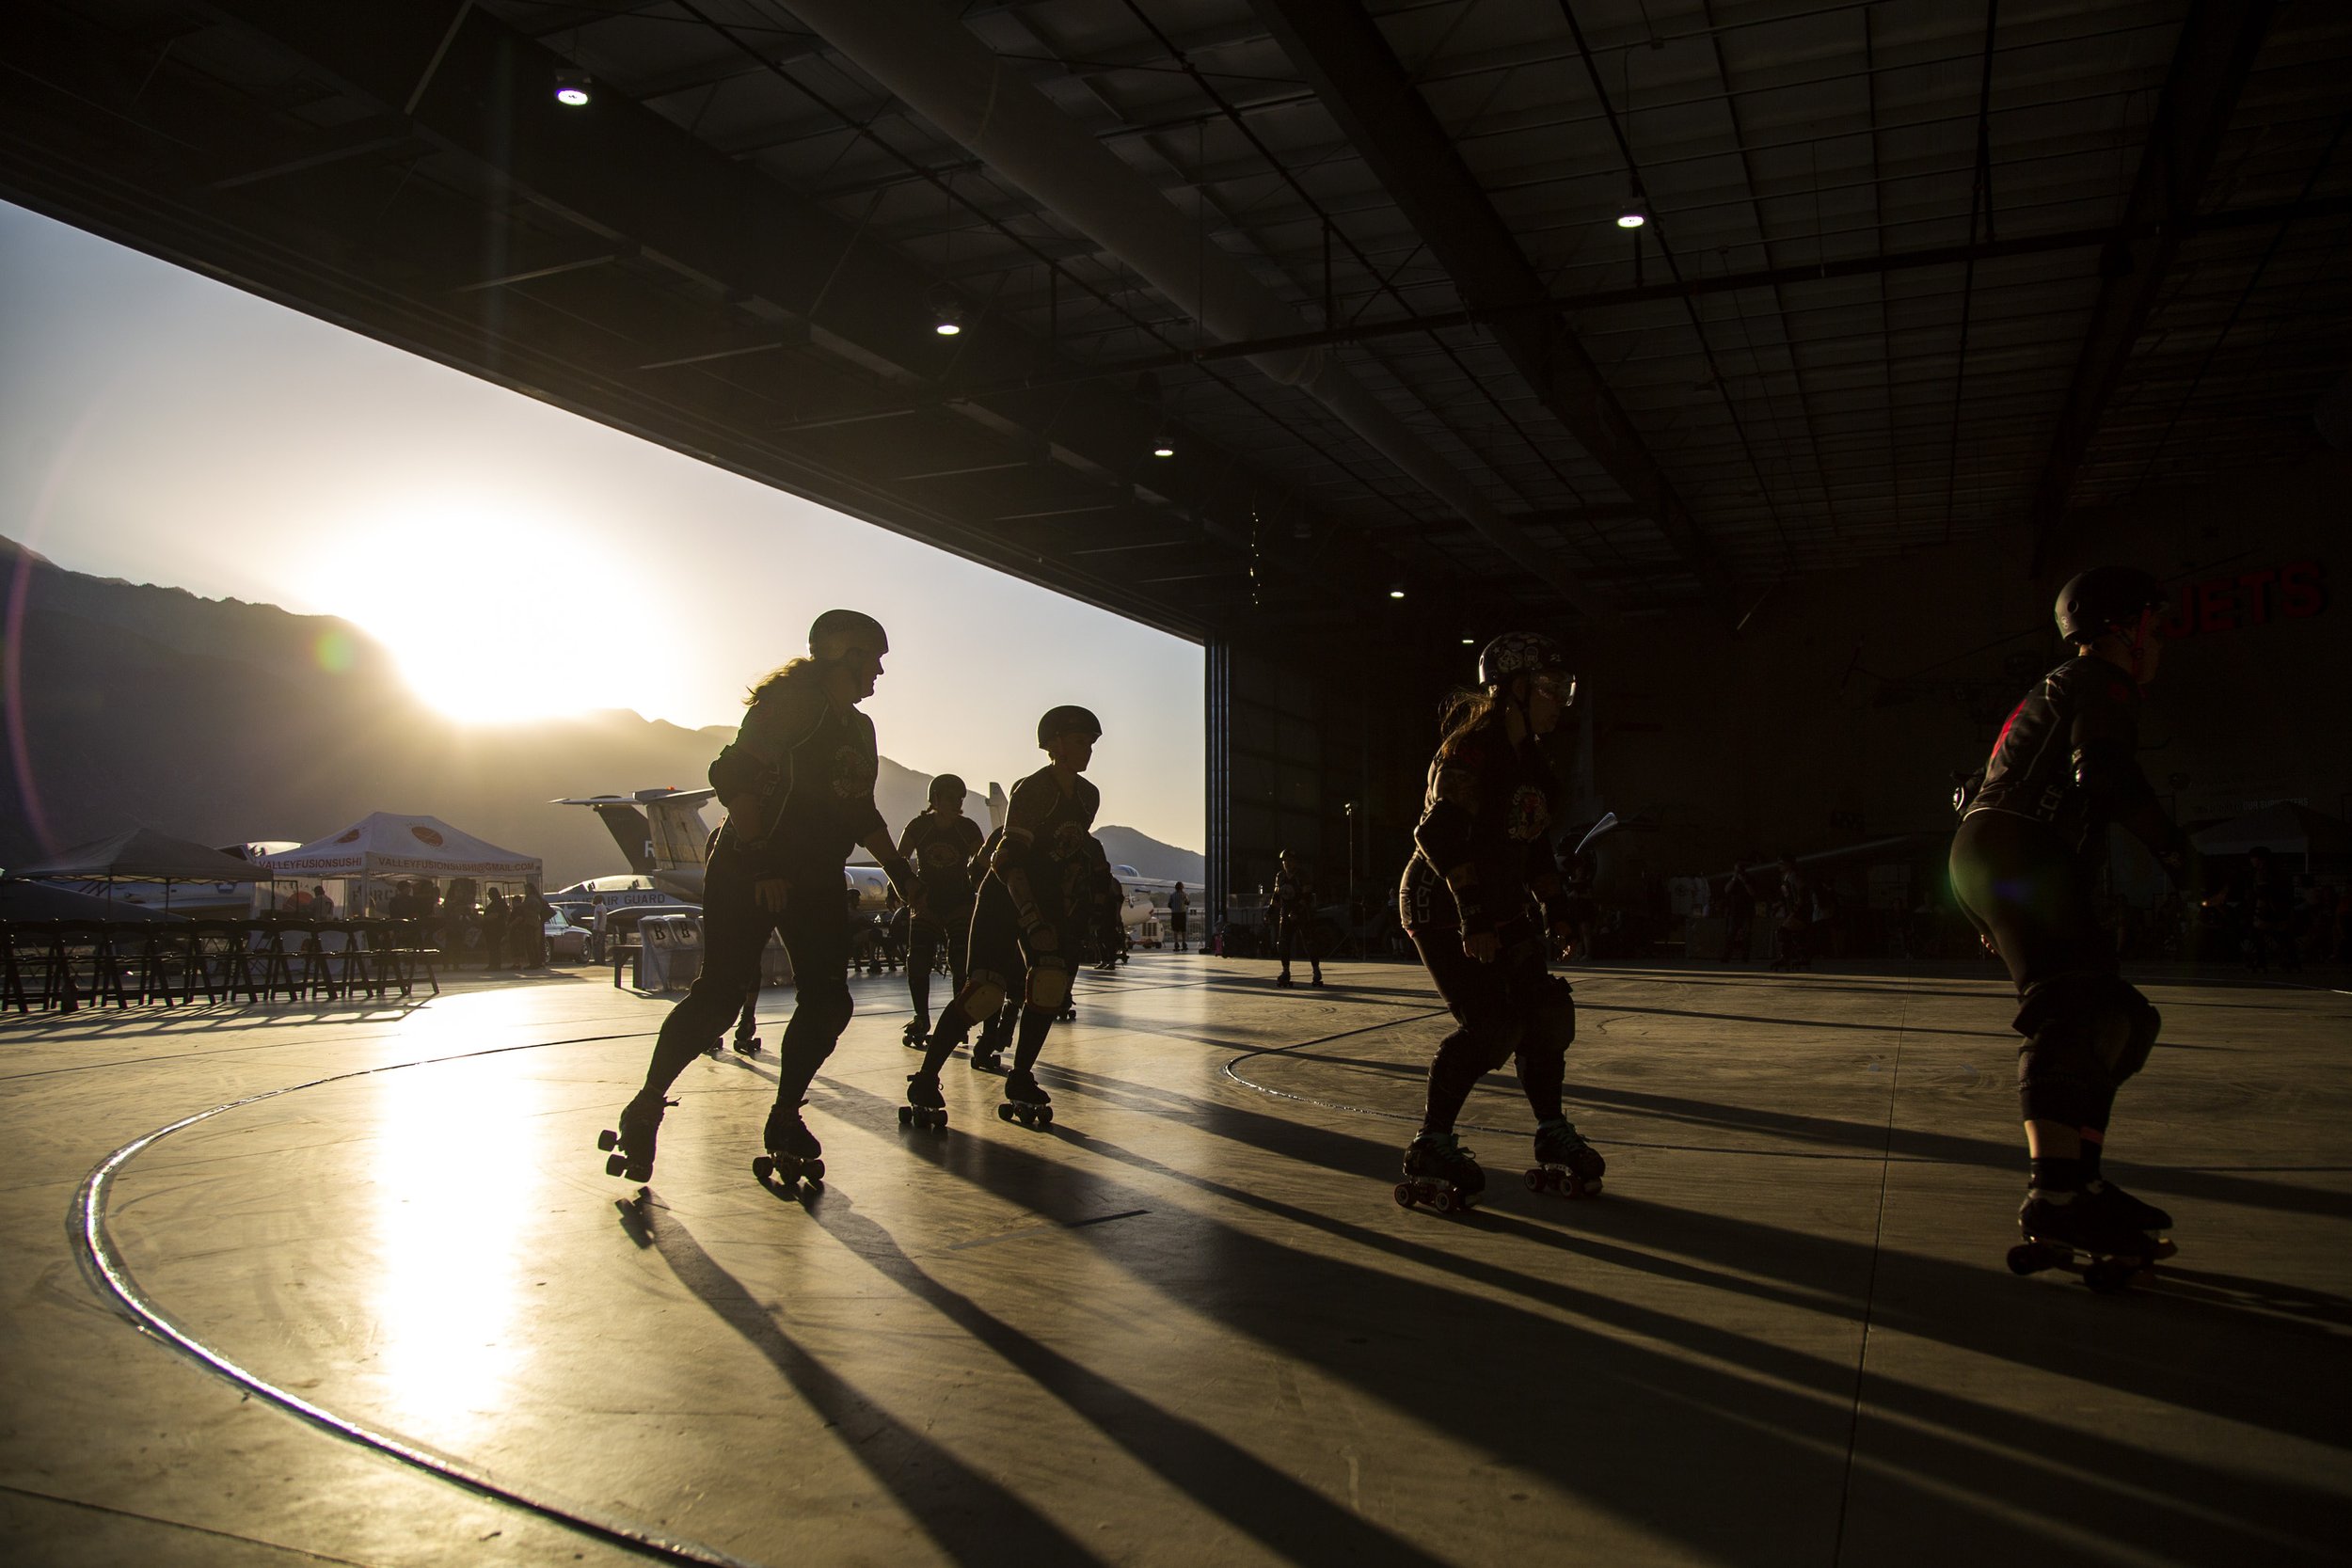  Scenes from the Coachella Valley Derby Girls' homecoming bout at the Palm Springs Air Museum in Palm Springs, Calif., Saturday. The team was preparing for what was only their second-ever home bout in the 10 years since the team was formed.  